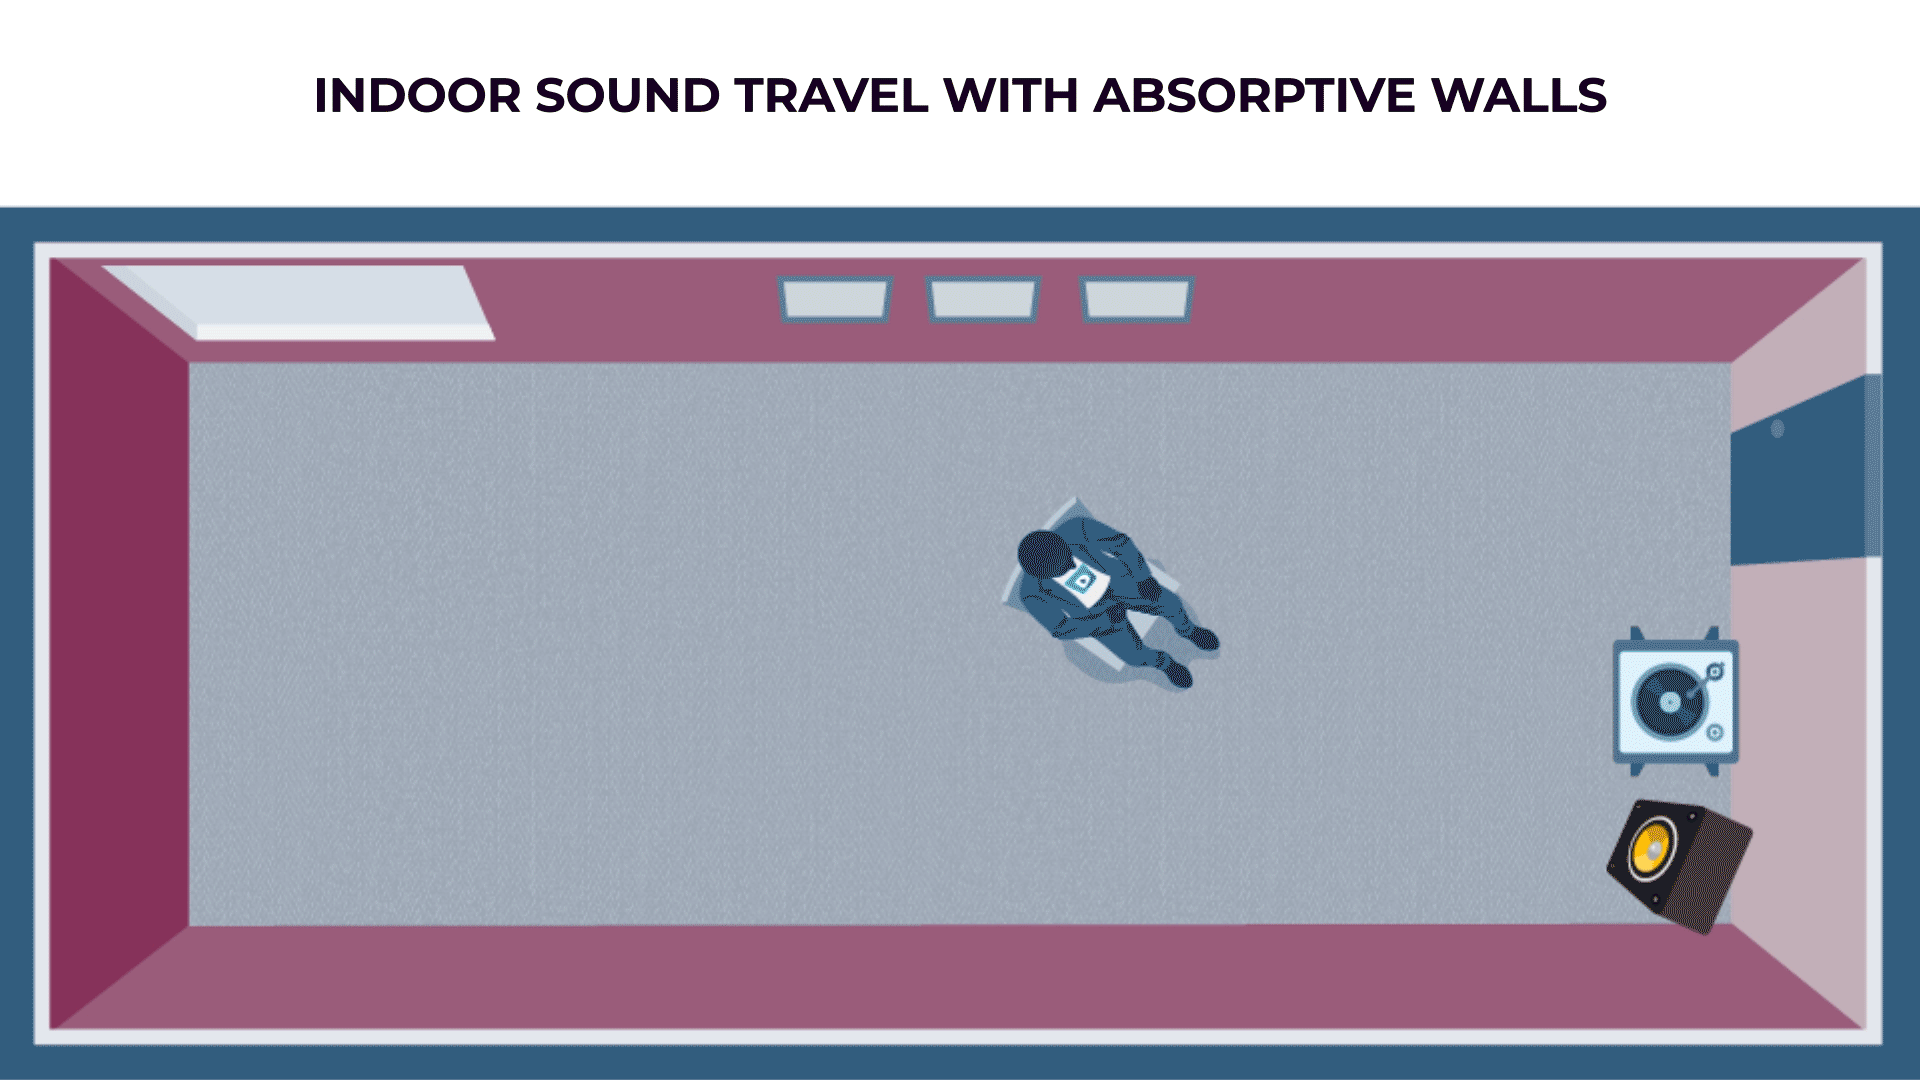 Animated graphic showing how sound travels indoors from a source and is absorbed and reflected off of walls. Unless walls are made of absorptive material, walls and not an effective noise control method.